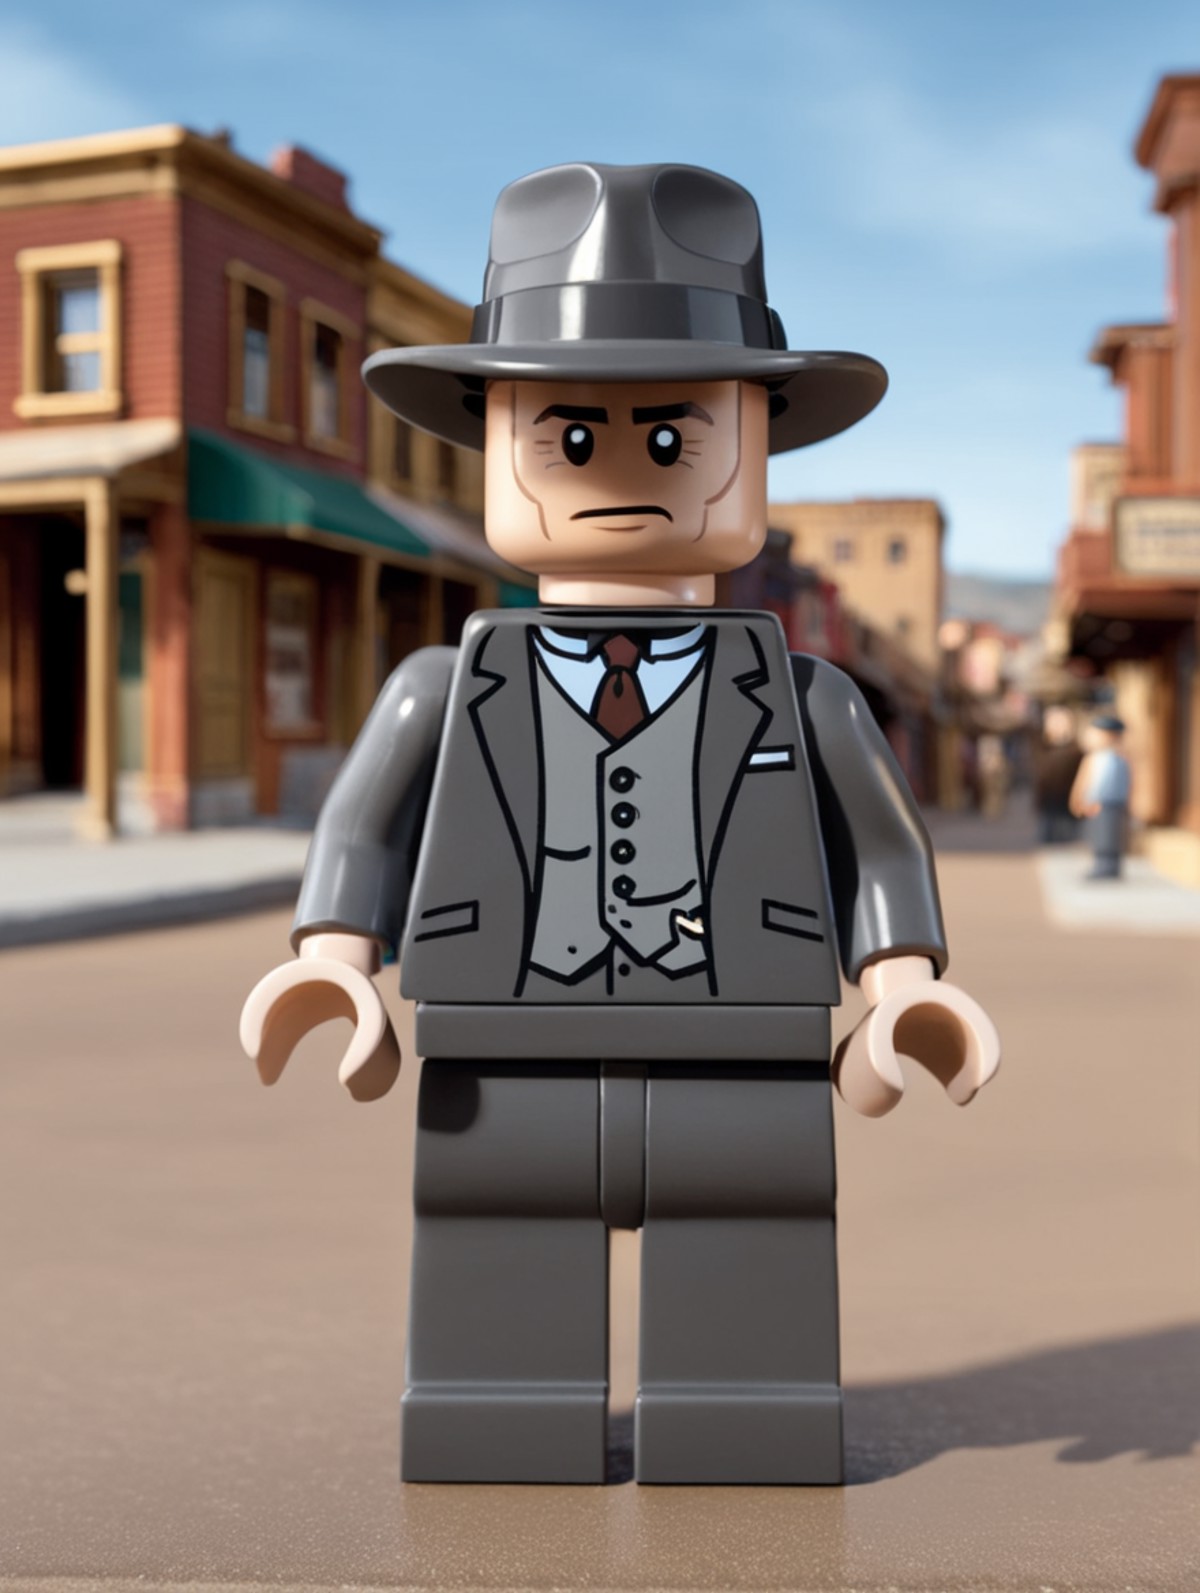 <lora:Lego_XL_v2.1:0.8>
LEGO MiniFig, A man in a vintage early-20th-century setting, possibly from a period film, stands p...